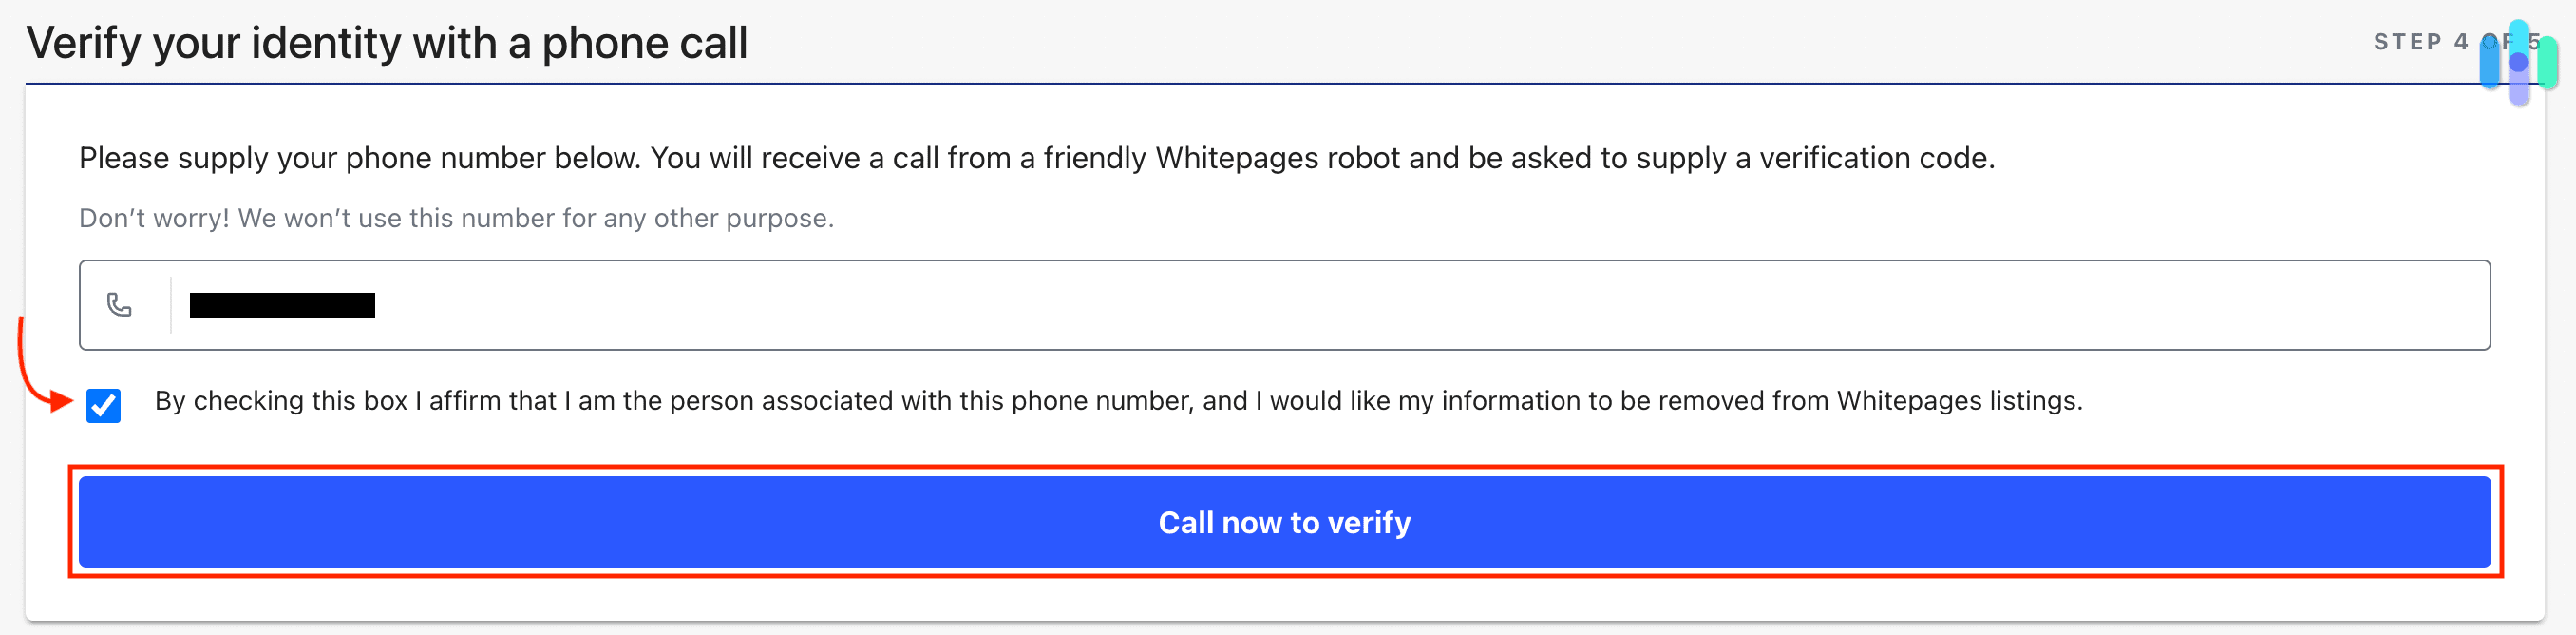 Whitepages opt out phone call verification